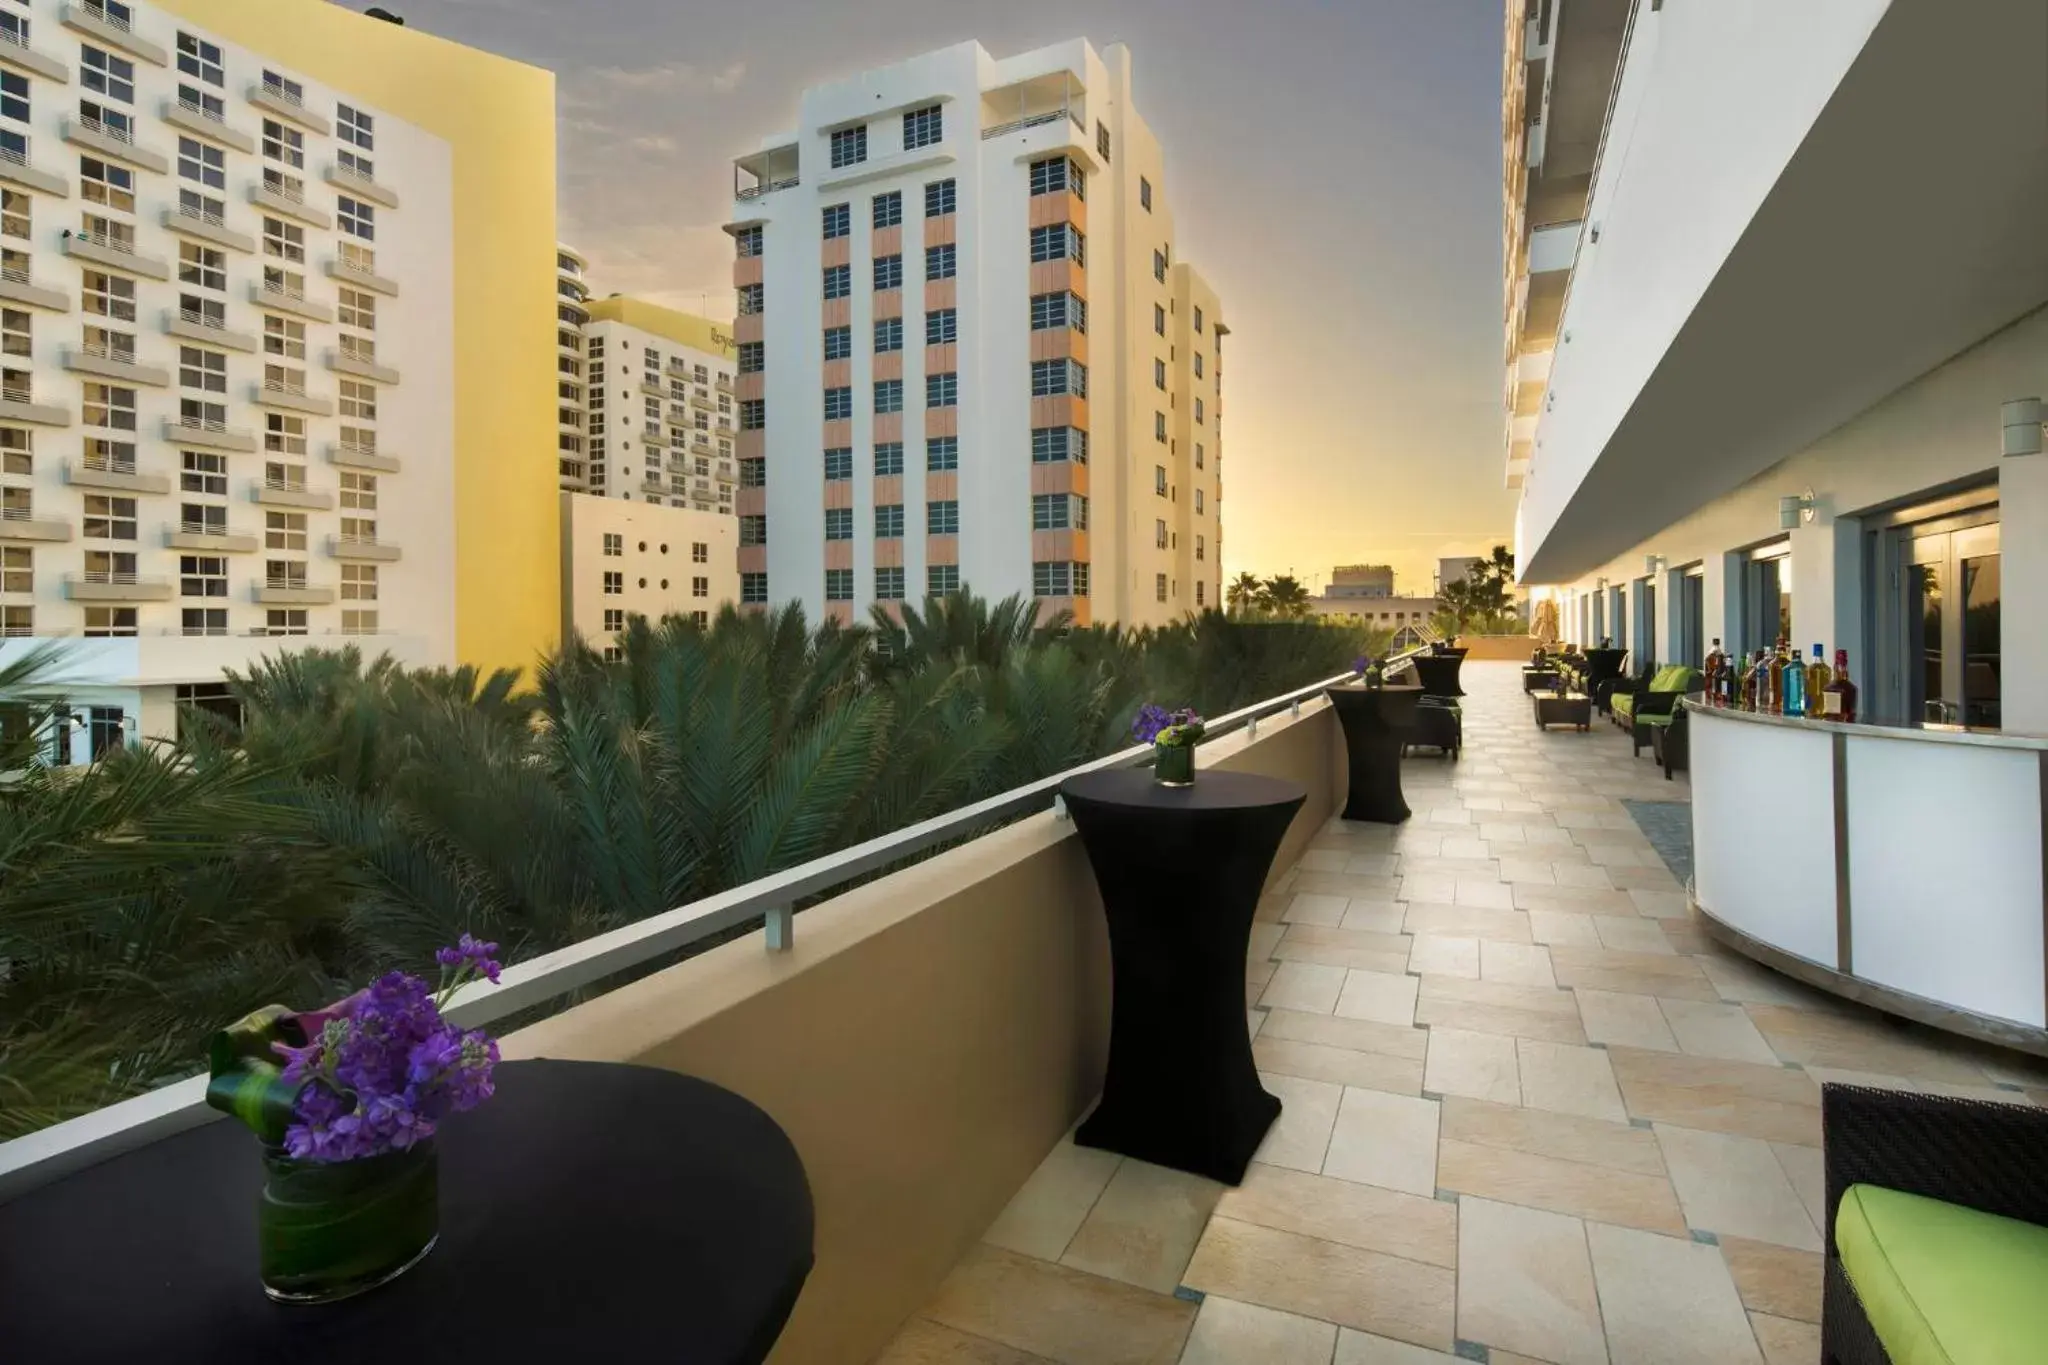 Meeting/conference room, Balcony/Terrace in Loews Miami Beach Hotel